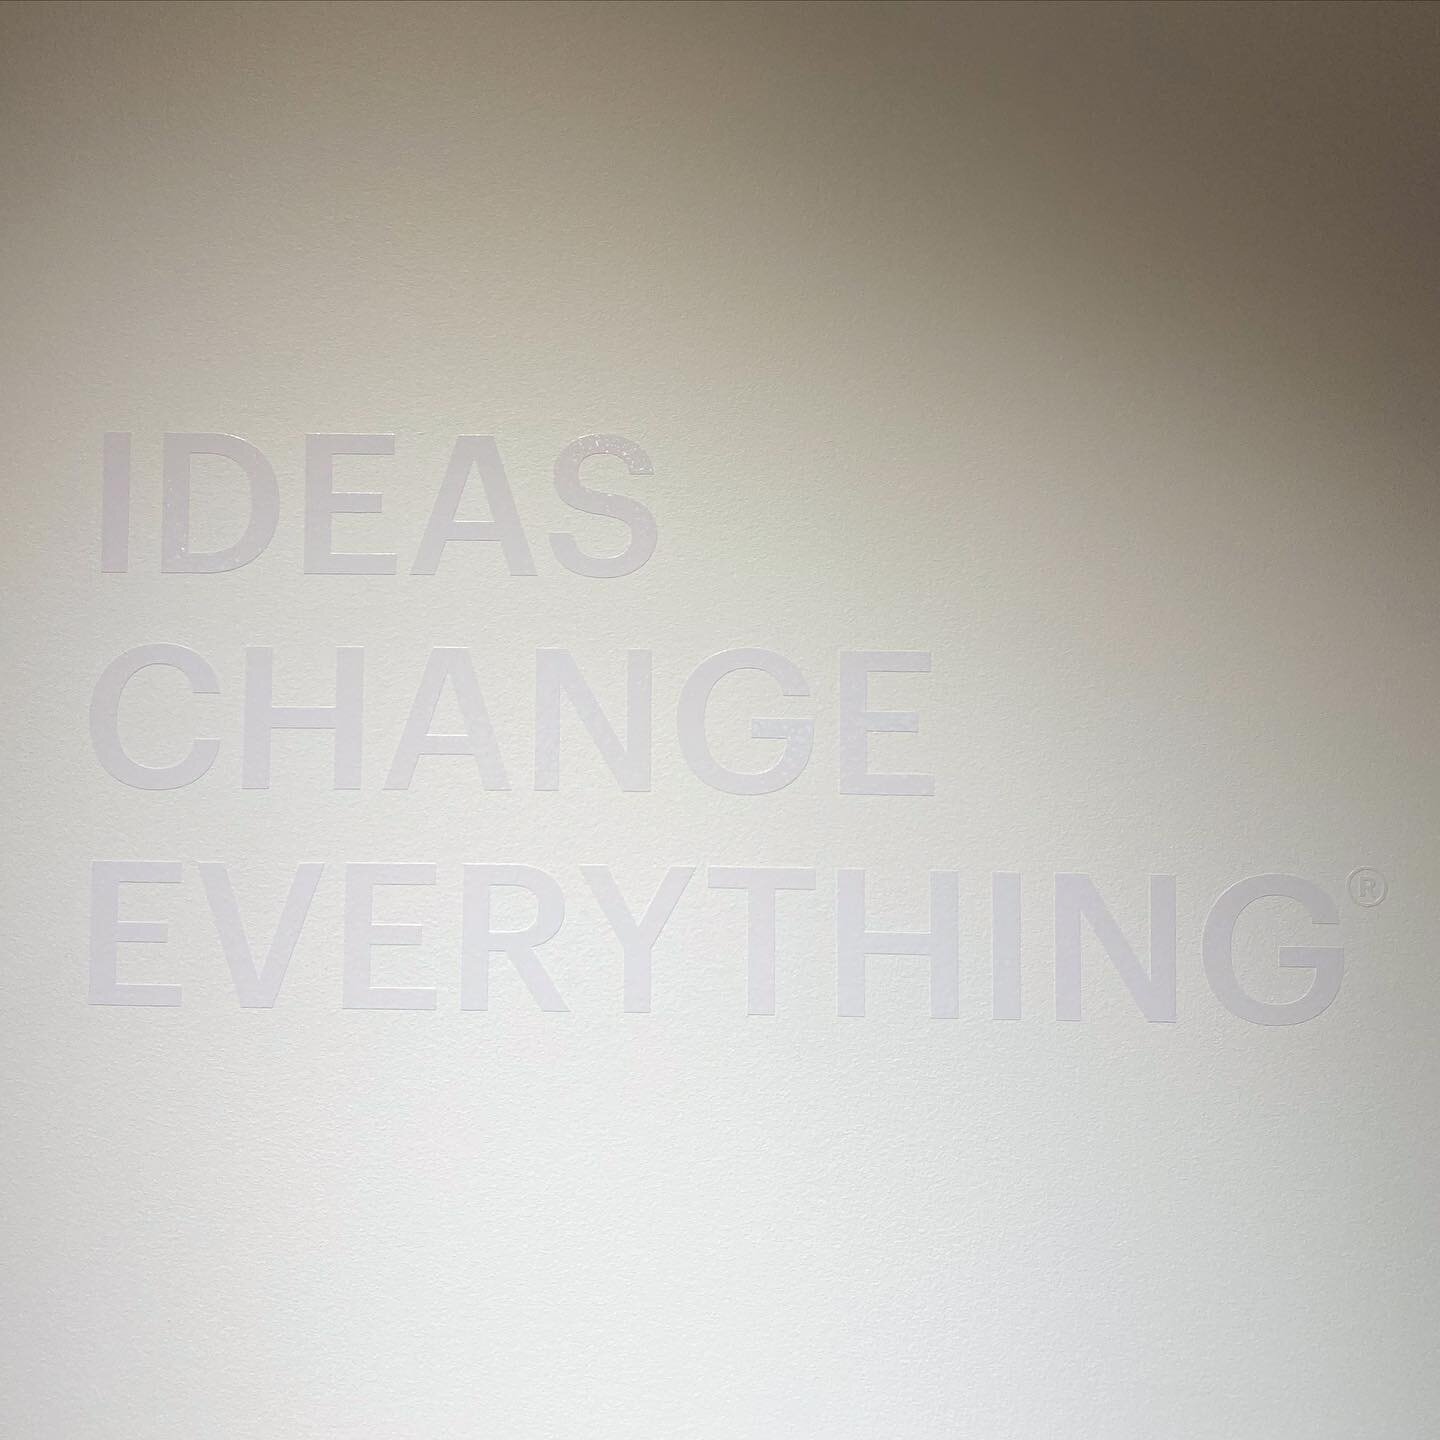 IDEAS
CHANGE
EVERYTHING #virtuo